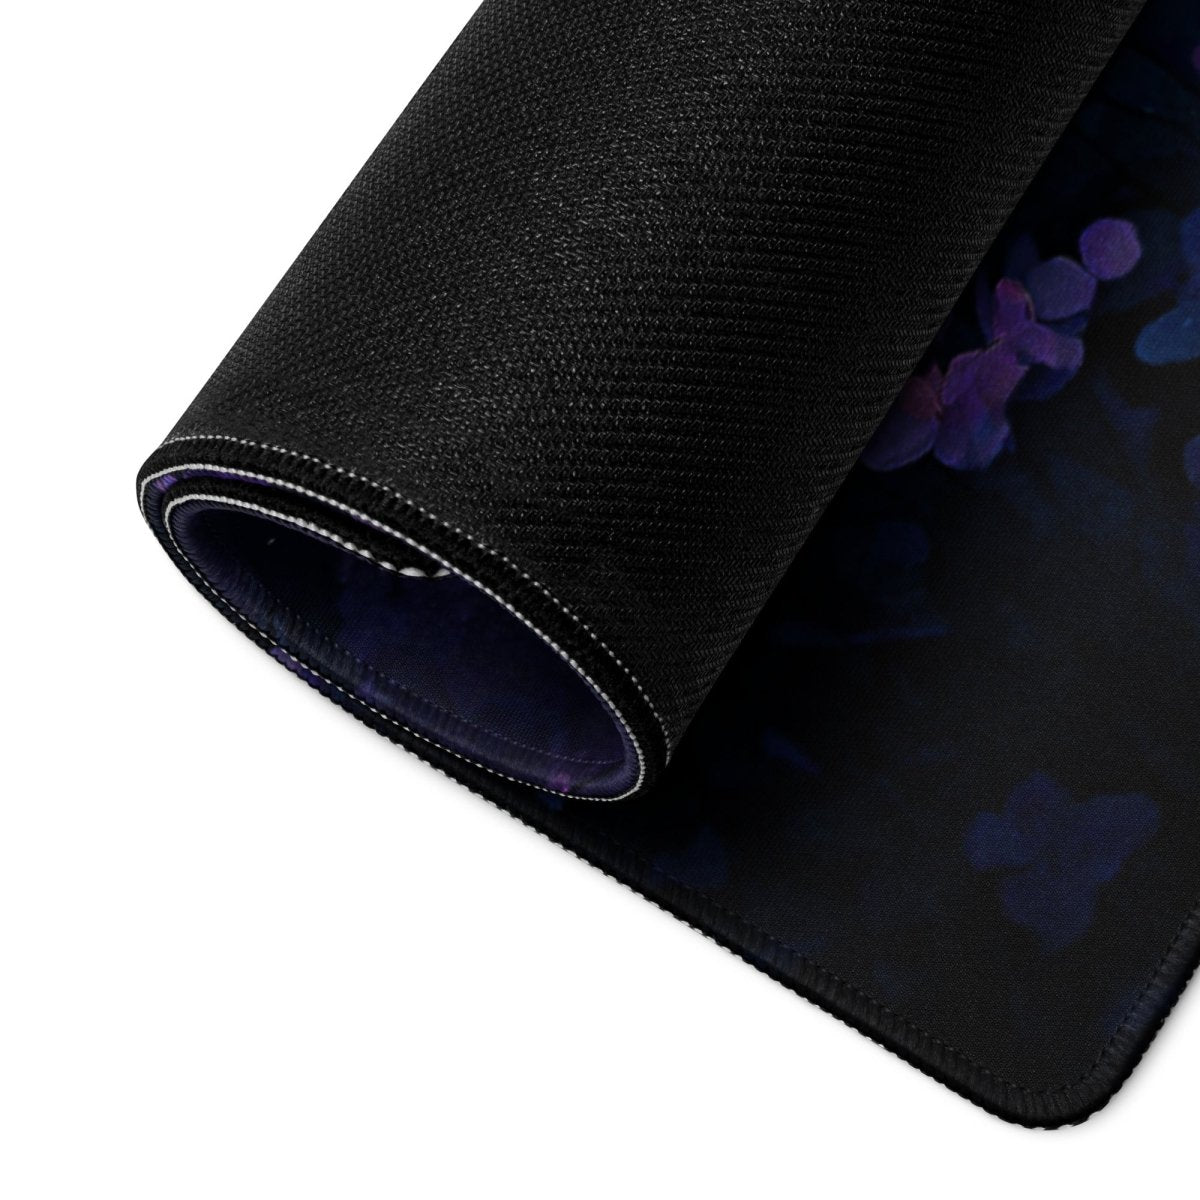 Violet forest - Gaming mouse pad - Ever colorful